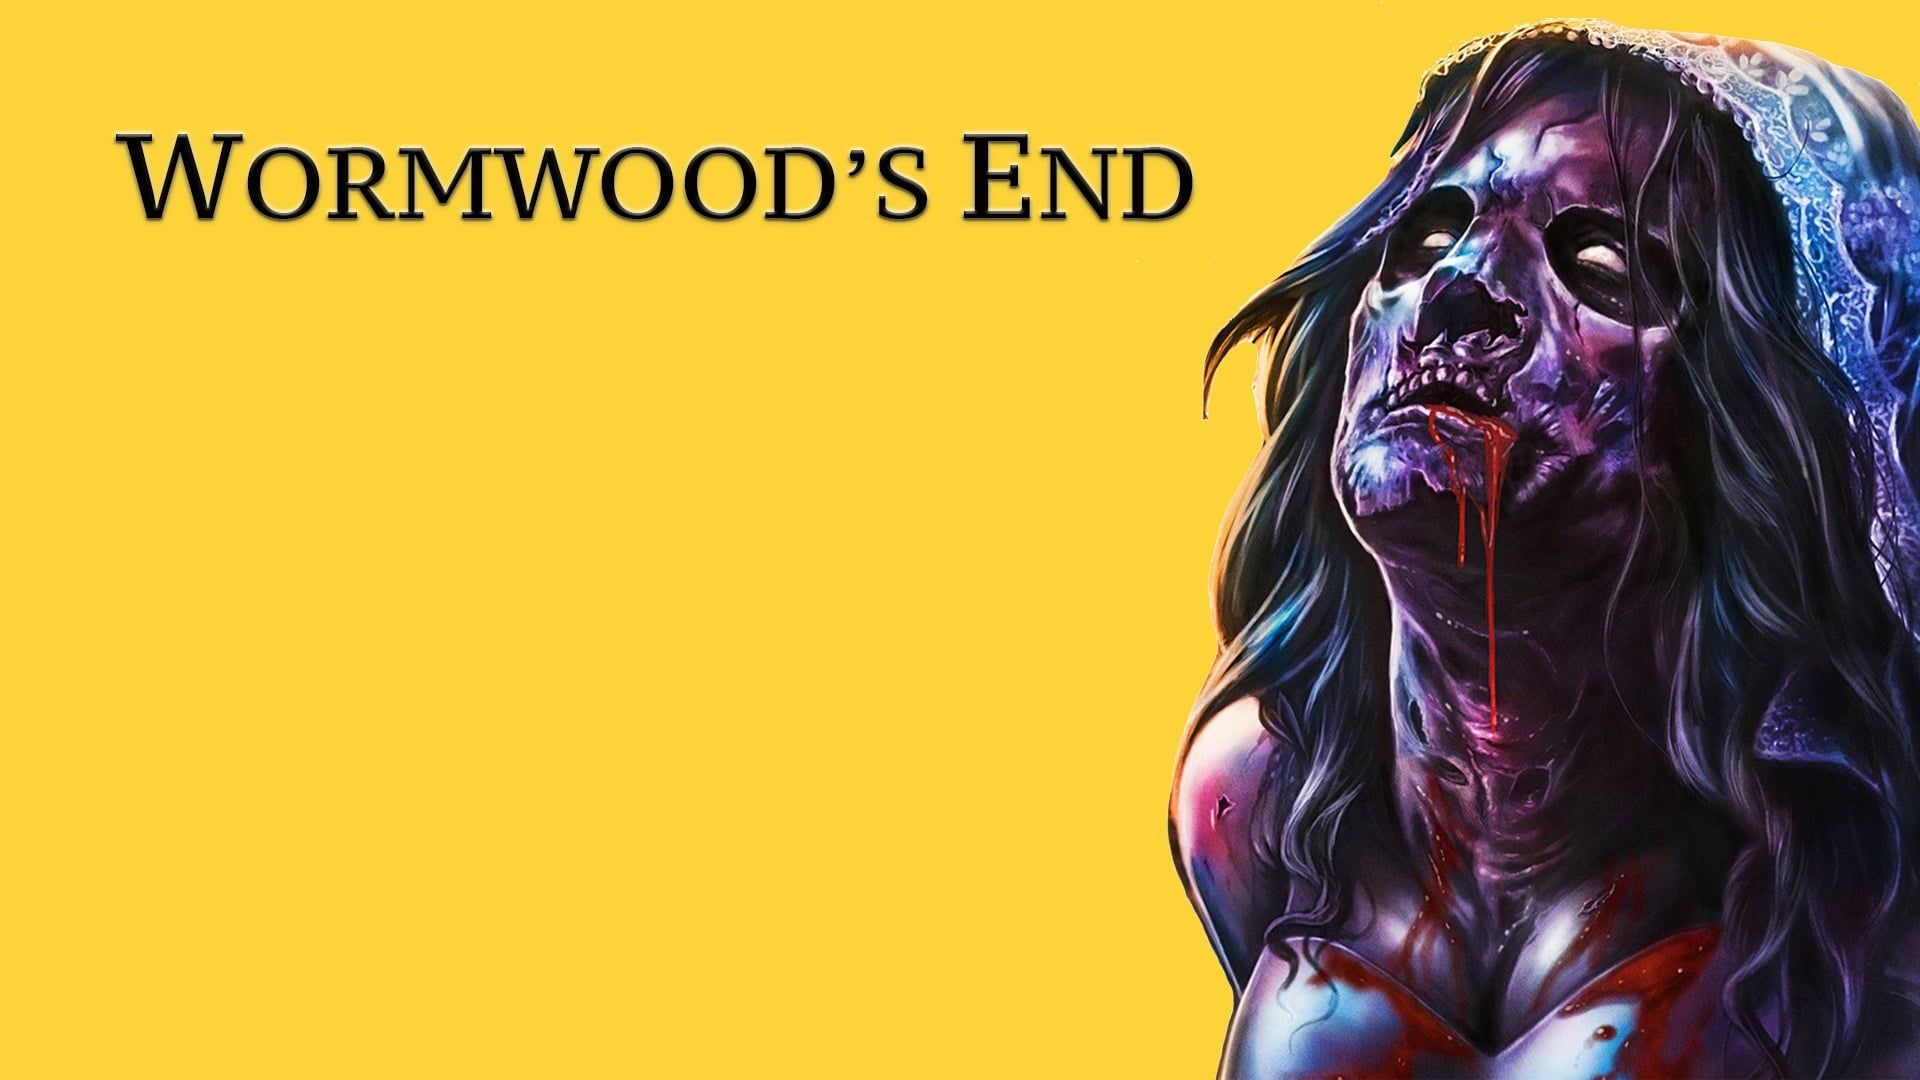 Wormwood's End background